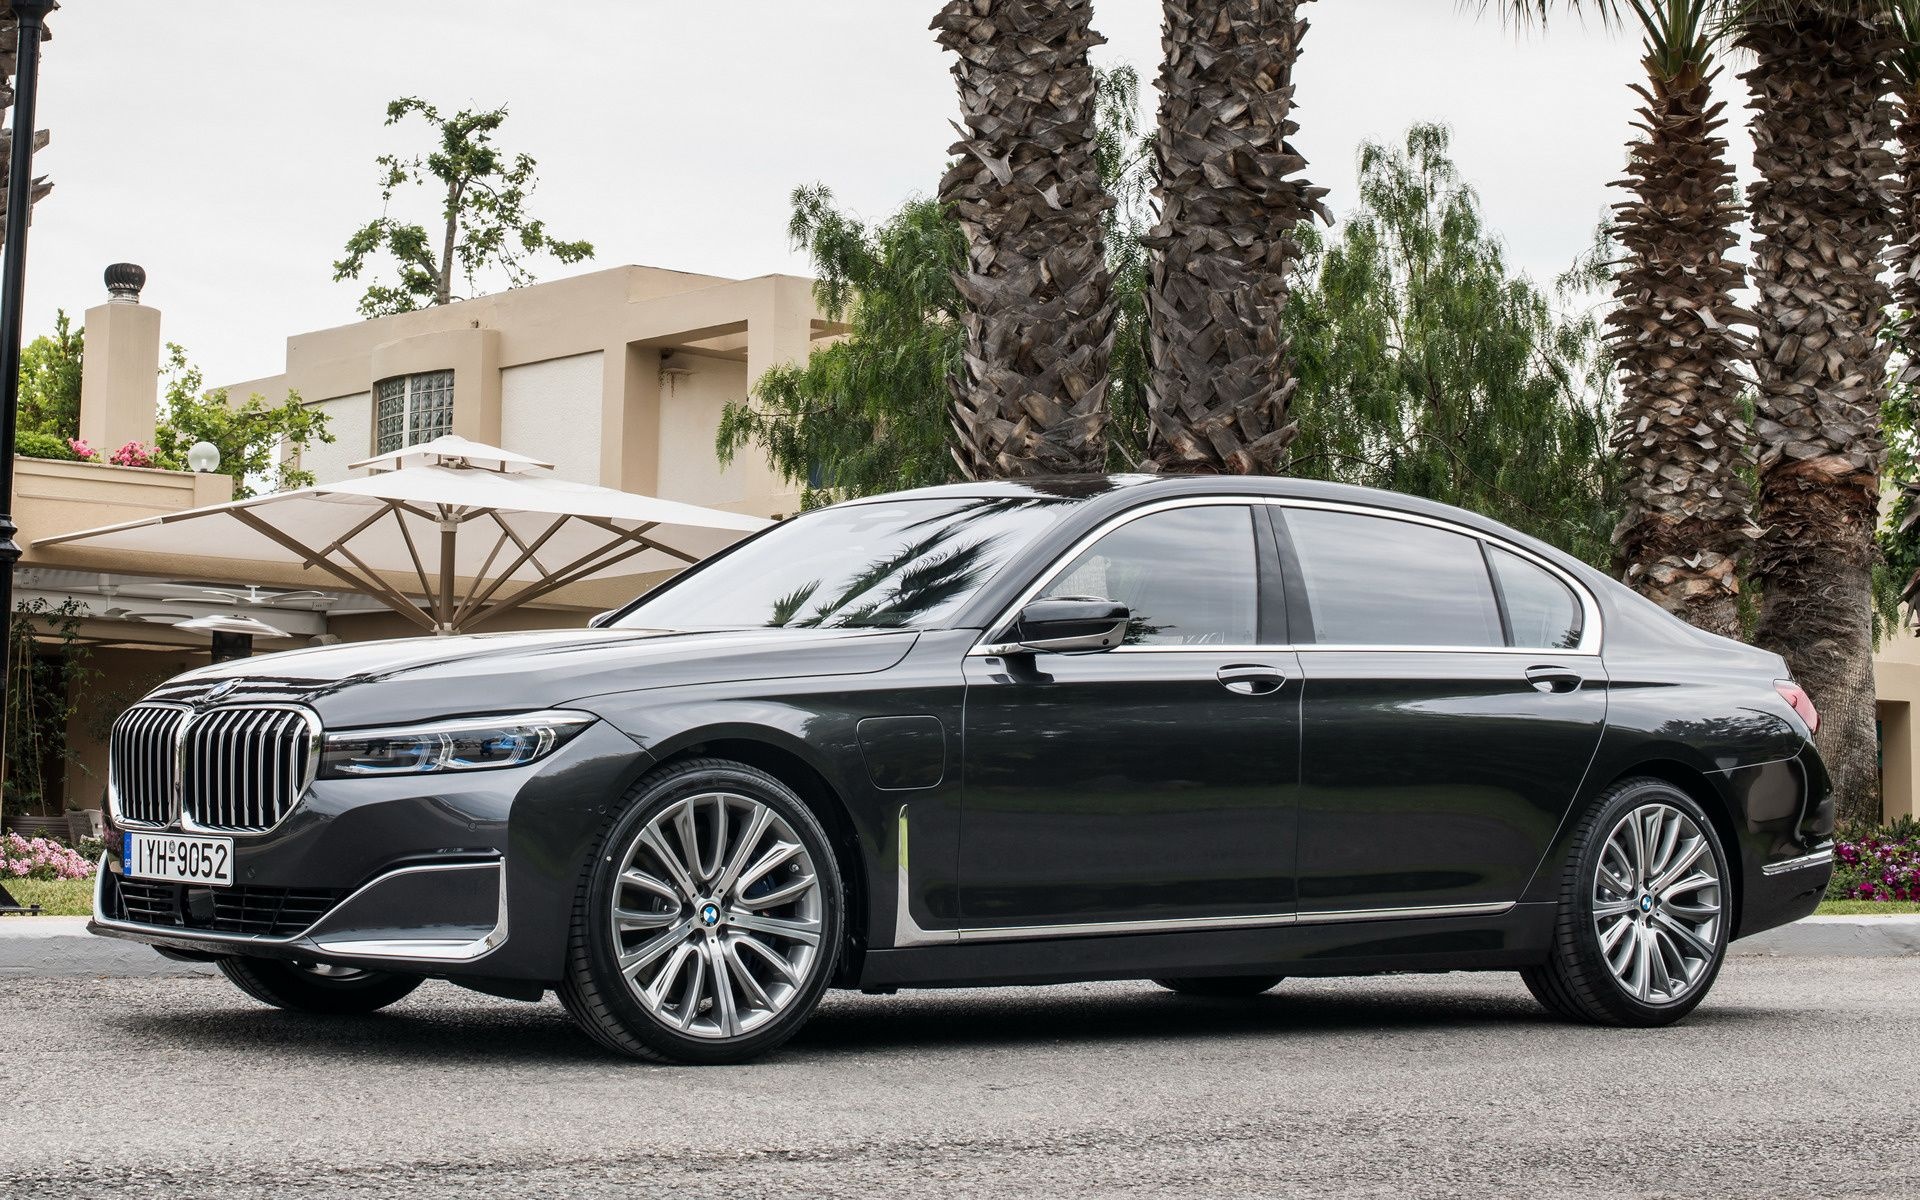 BMW 7 Series, BMW 7 Series wallpapers, Imposing presence, Unmatched sophistication, 1920x1200 HD Desktop